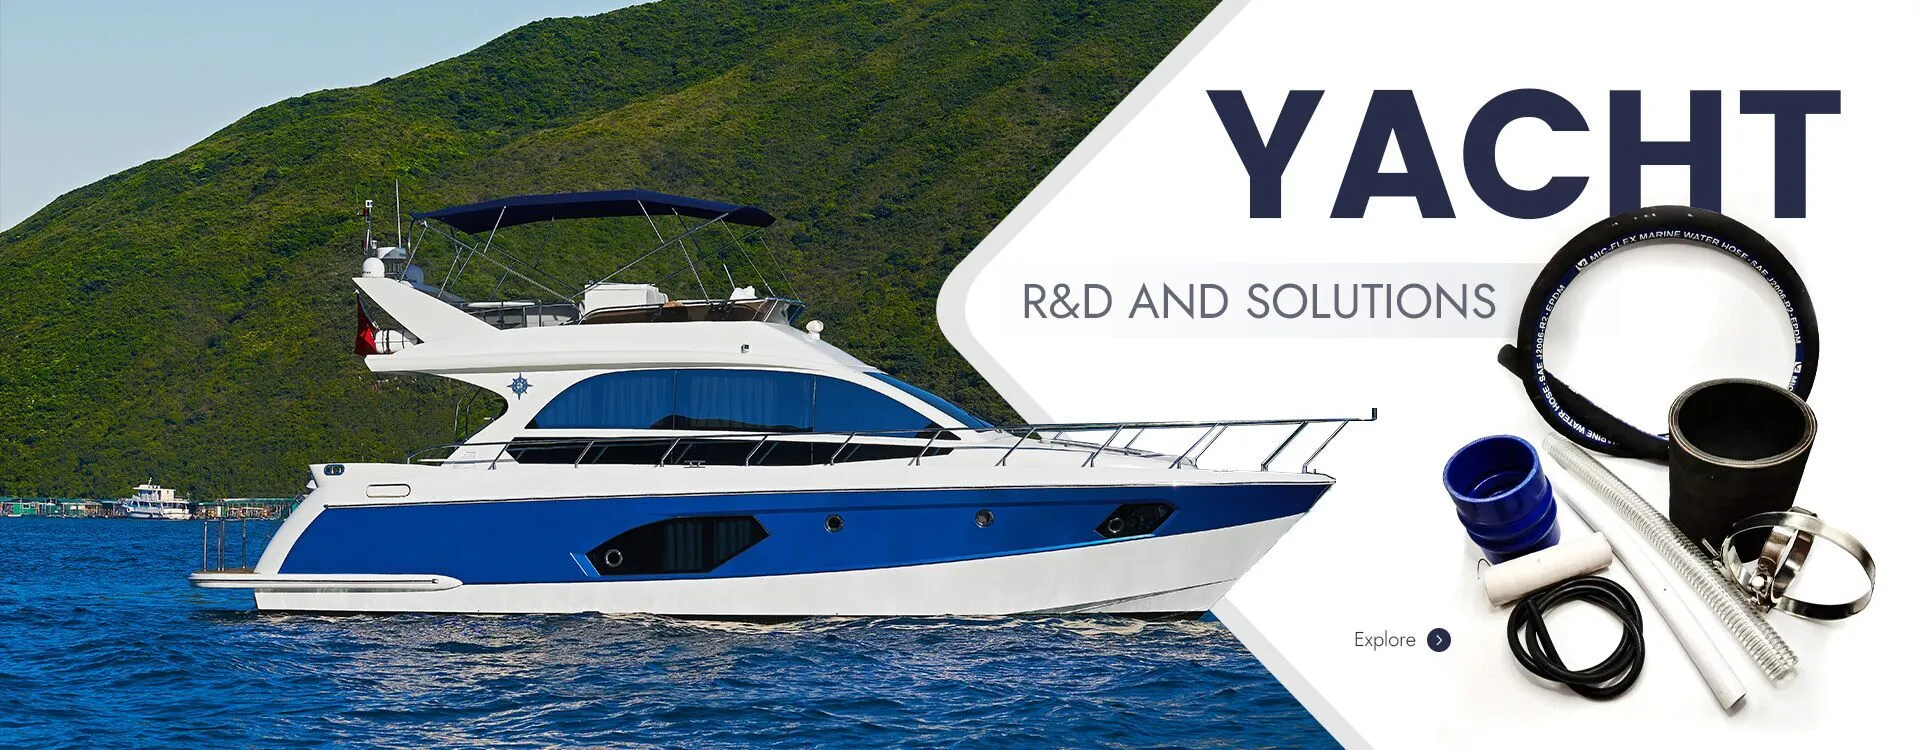 Yacht R&D AND SOLUTIONS